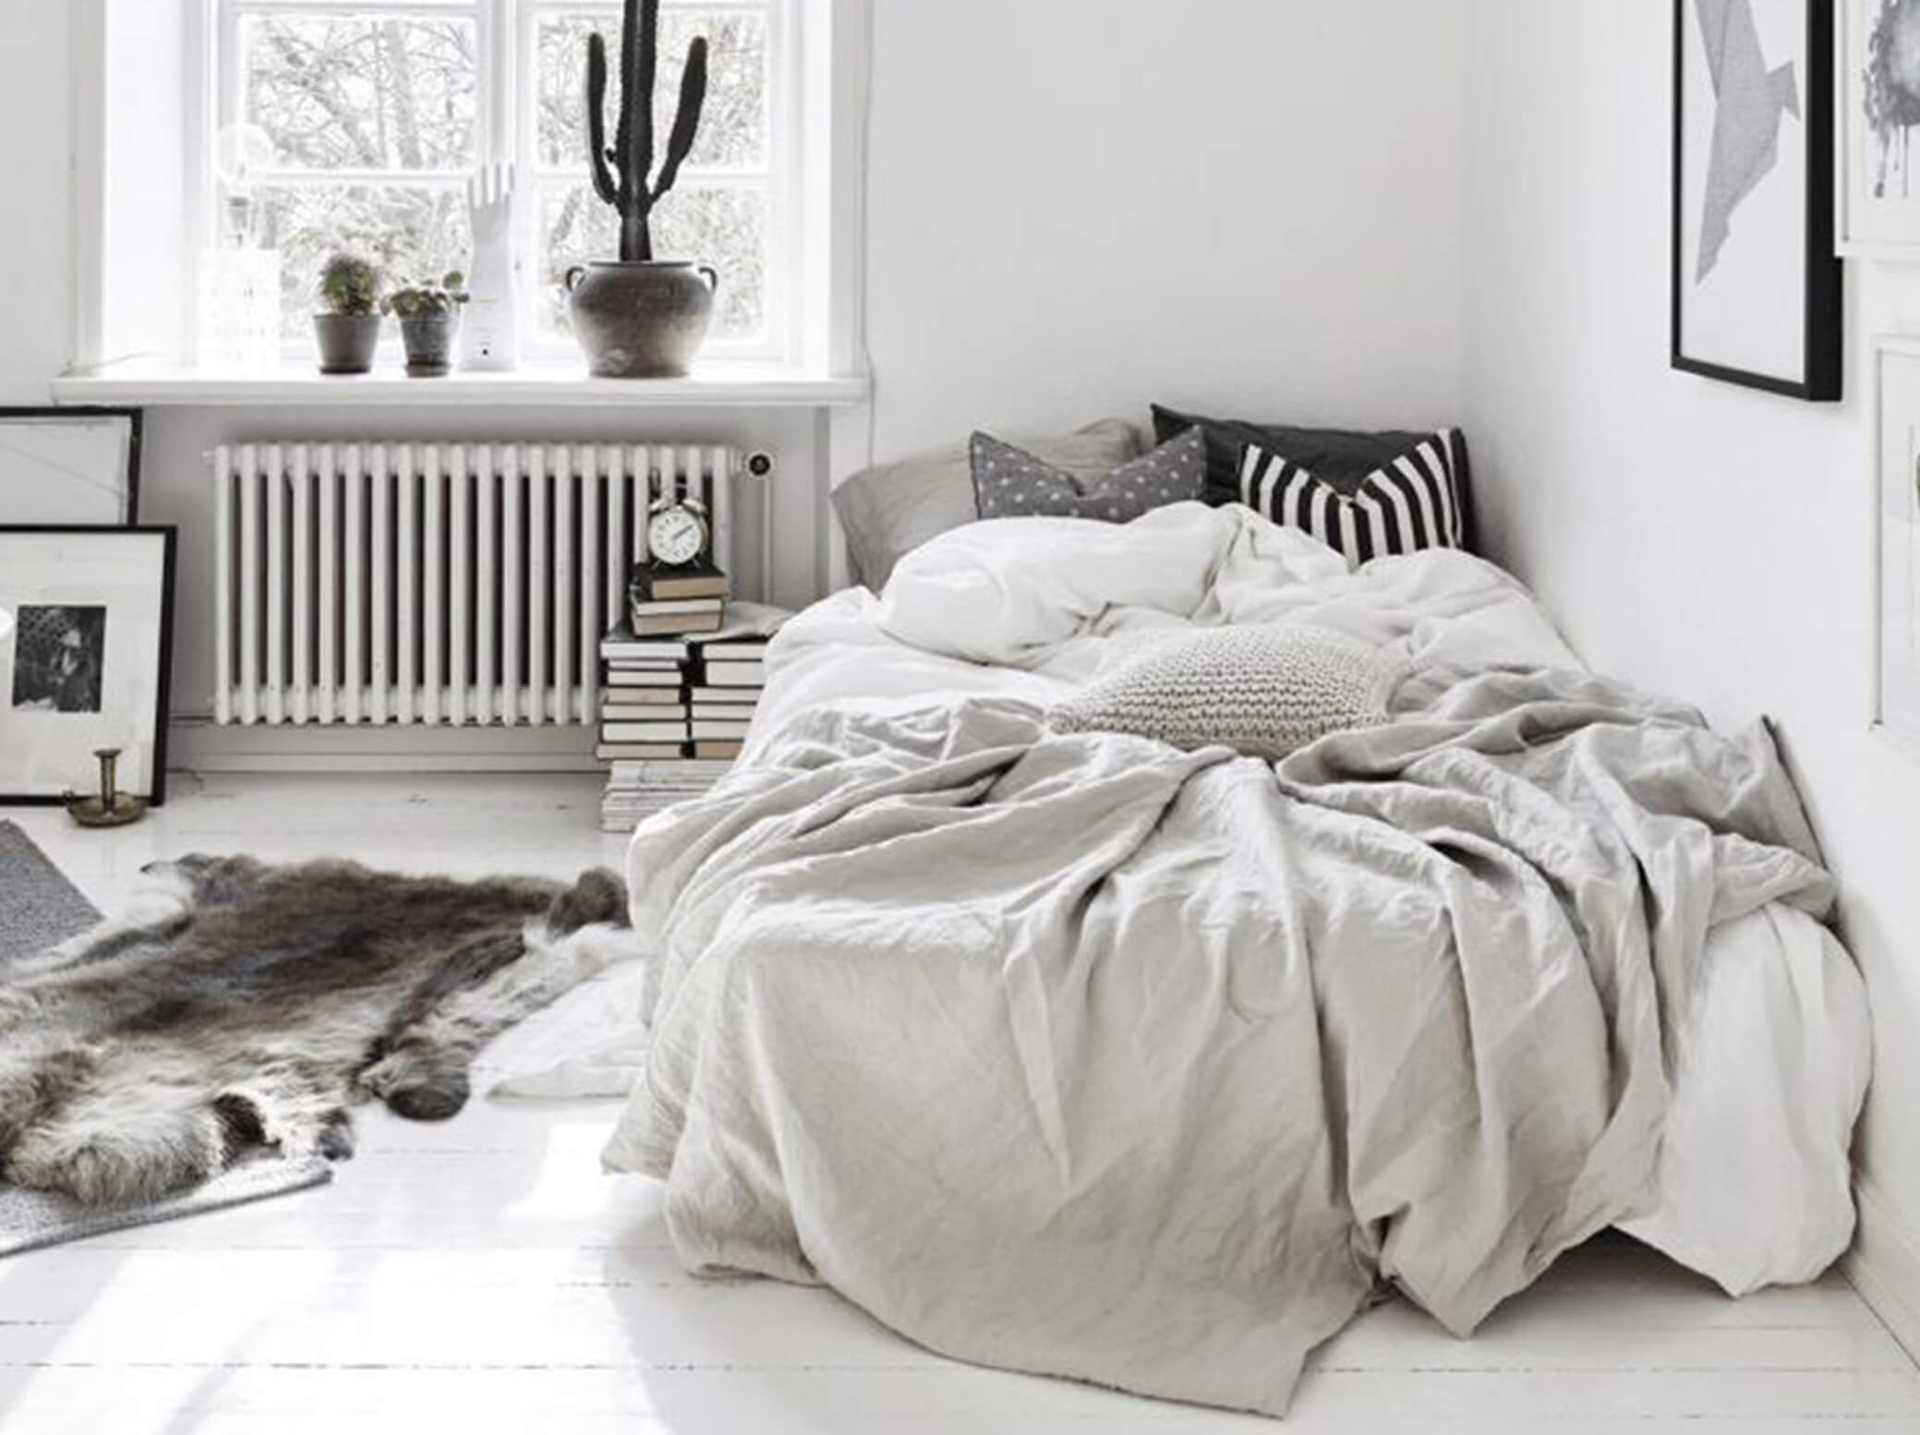 Essential Rules to A Tidy Bedroom